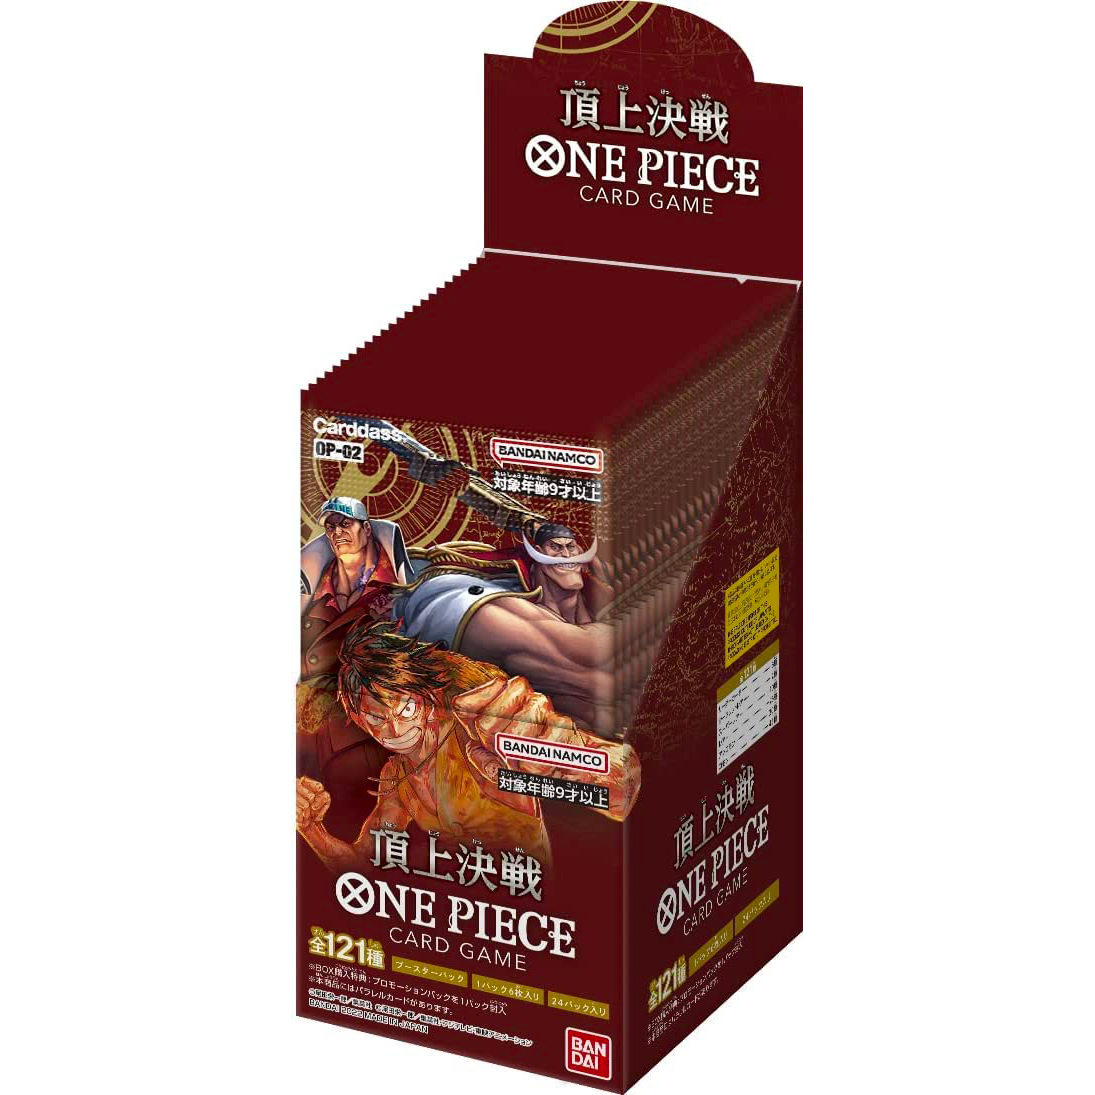 ONE PIECE CARD GAME Booster Pack OP-02 PARAMOUNT WAR cards list